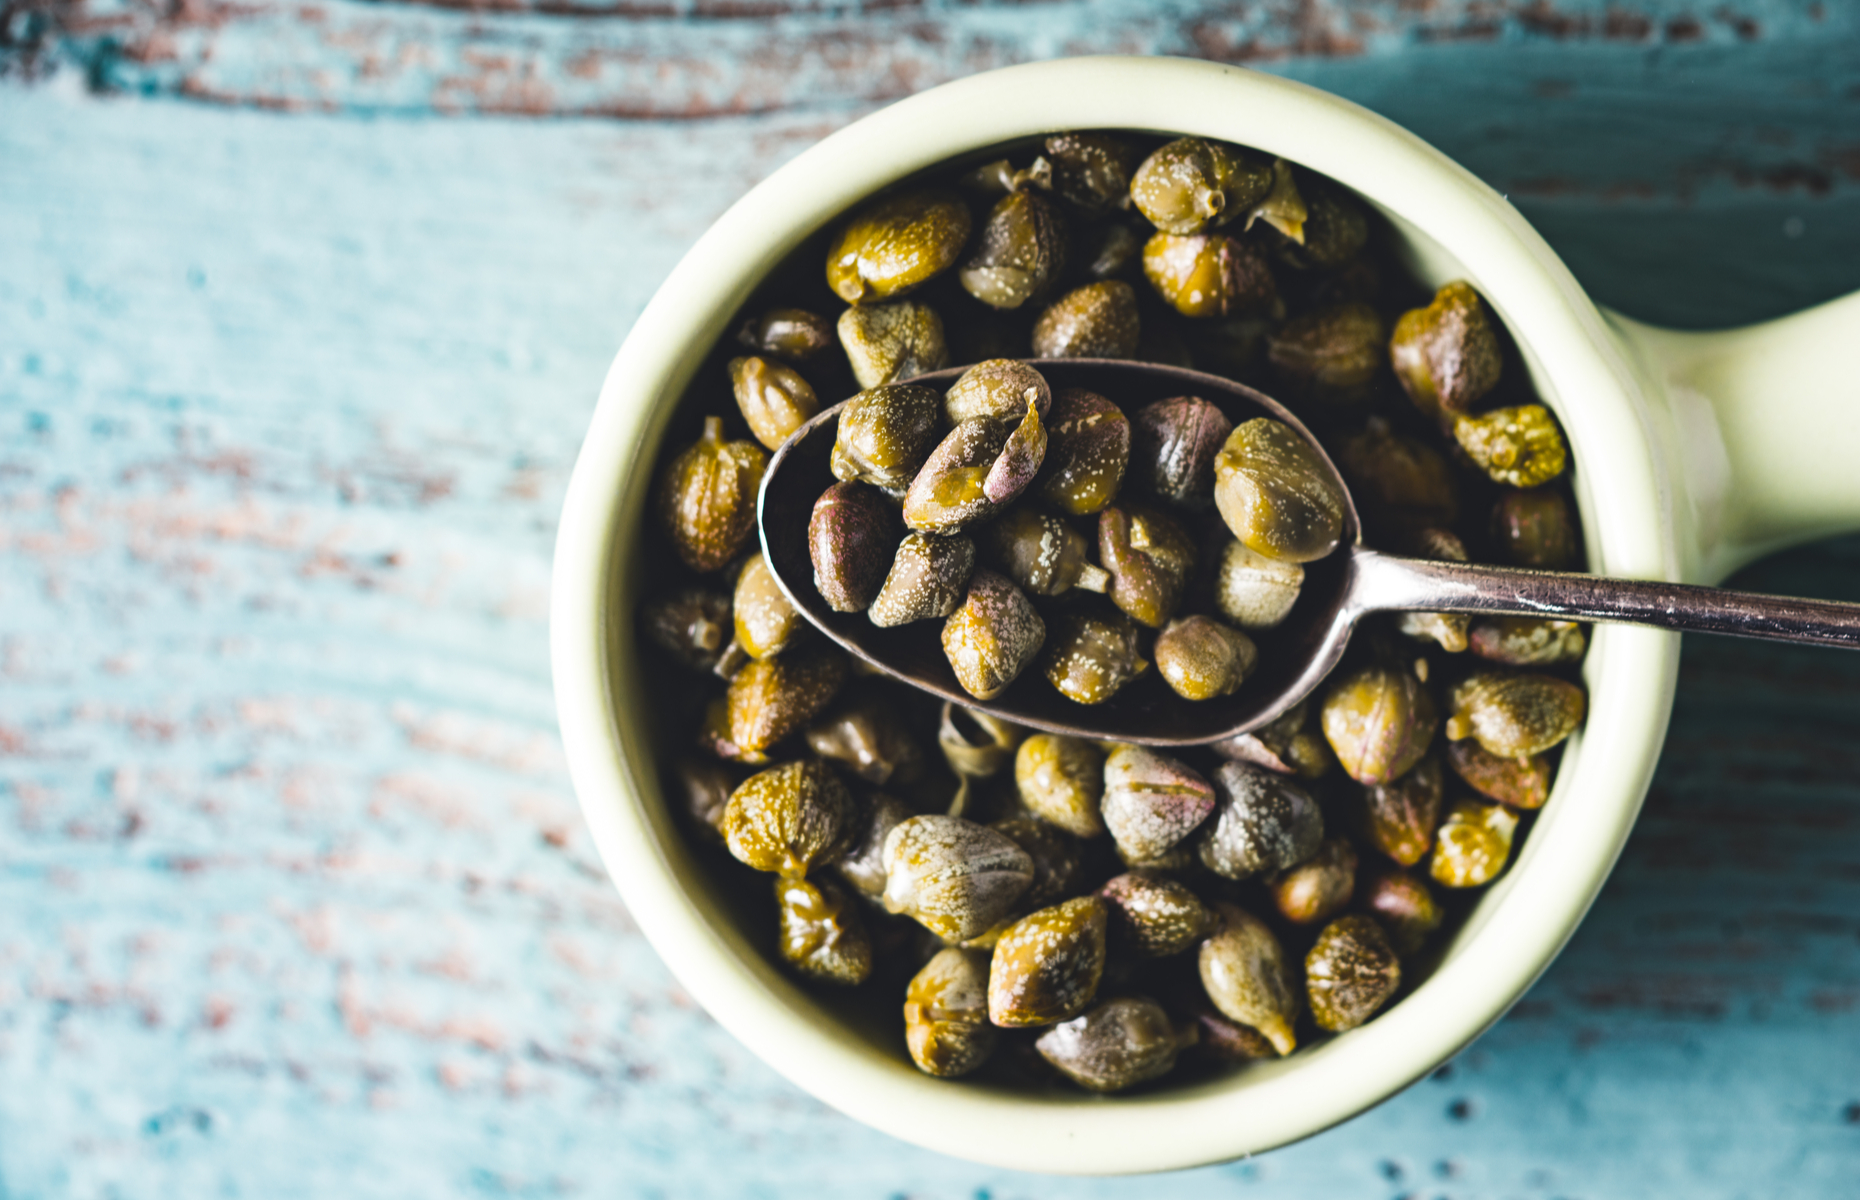 What are capers and how do you cook with them?